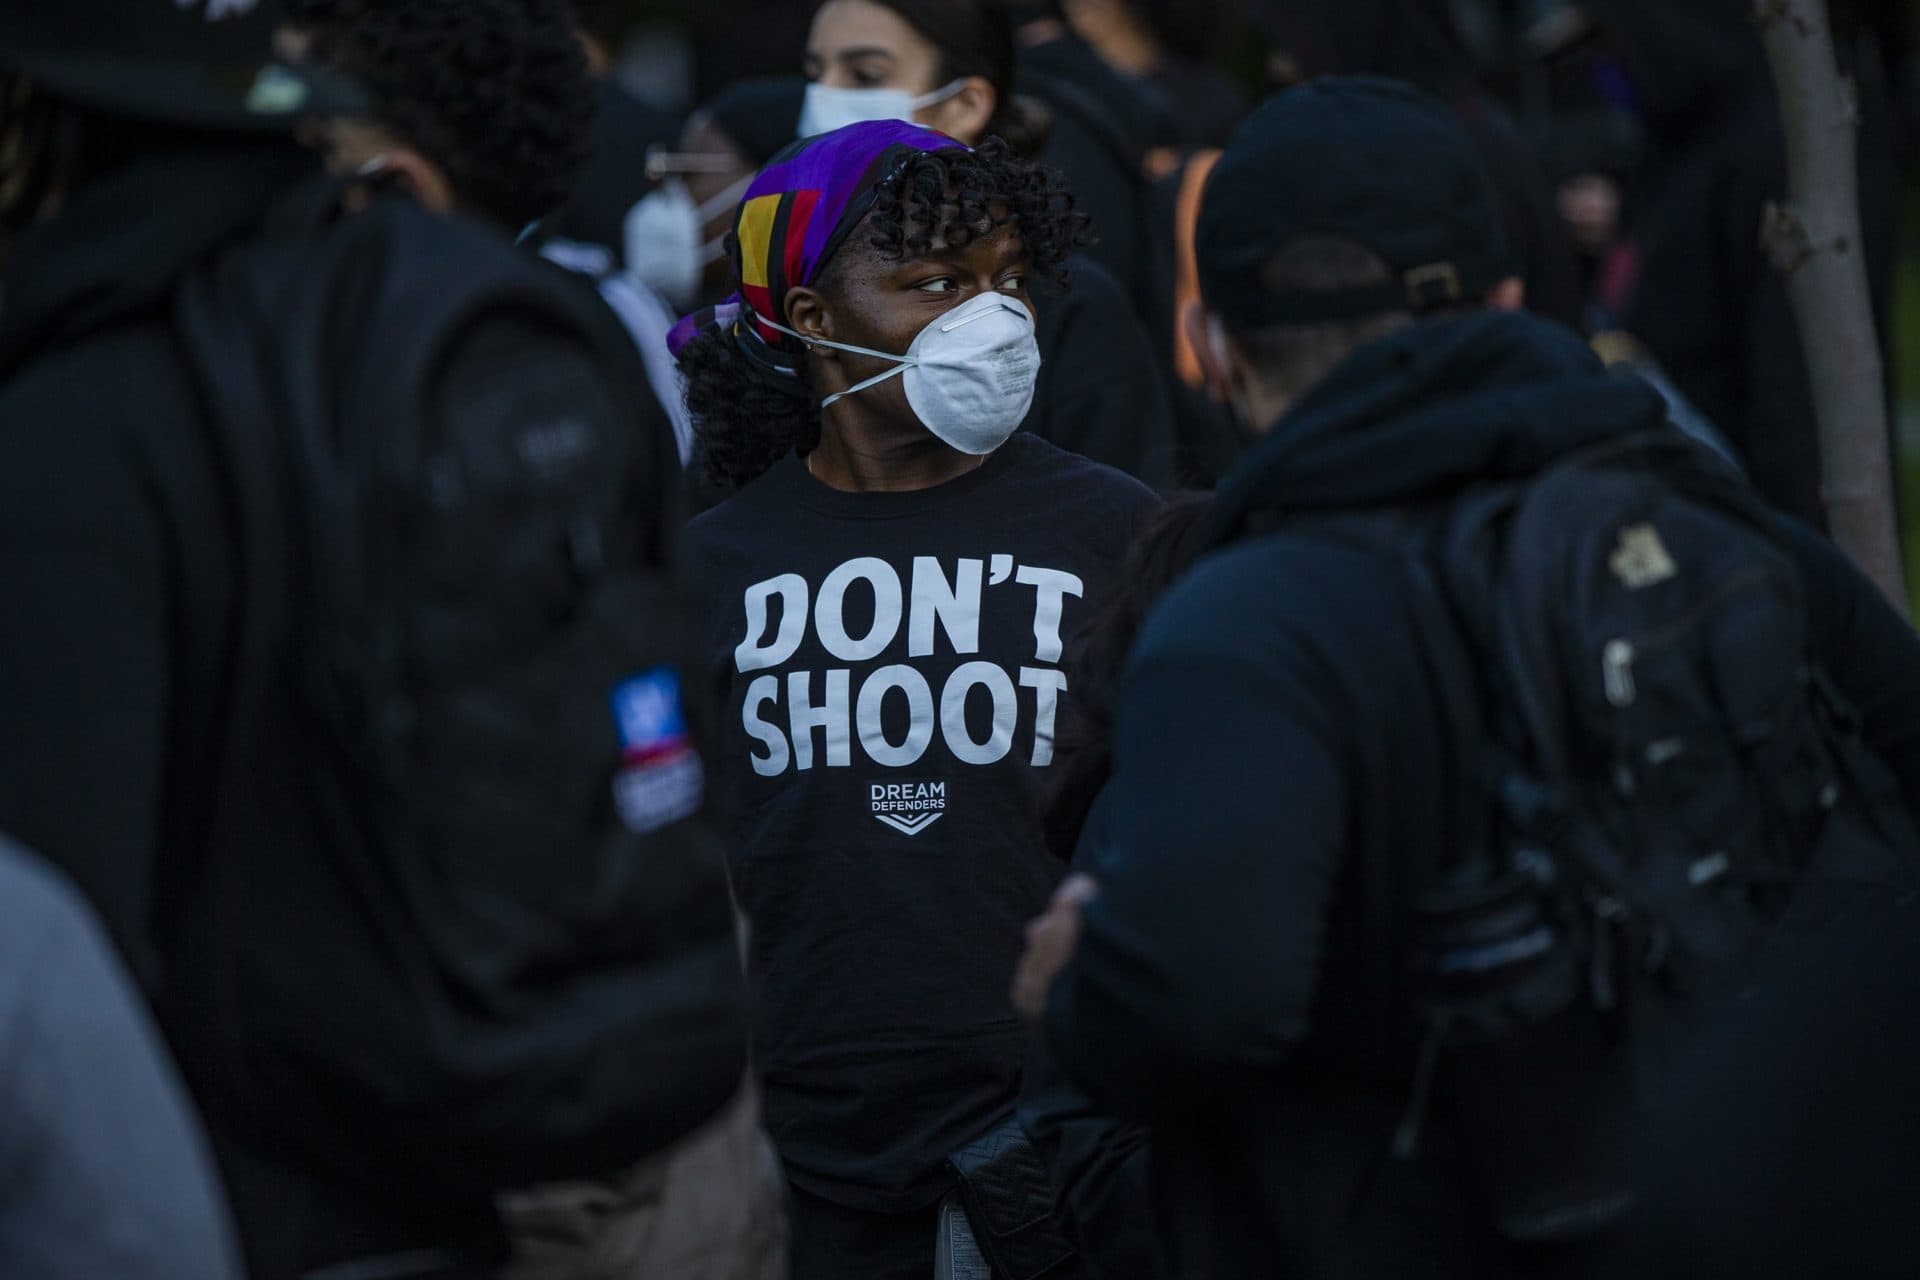 A woman wears a &quot;Don't shoot&quot; shirt during protest against police brutality on Sunday (Jesse Costa/WBUR)